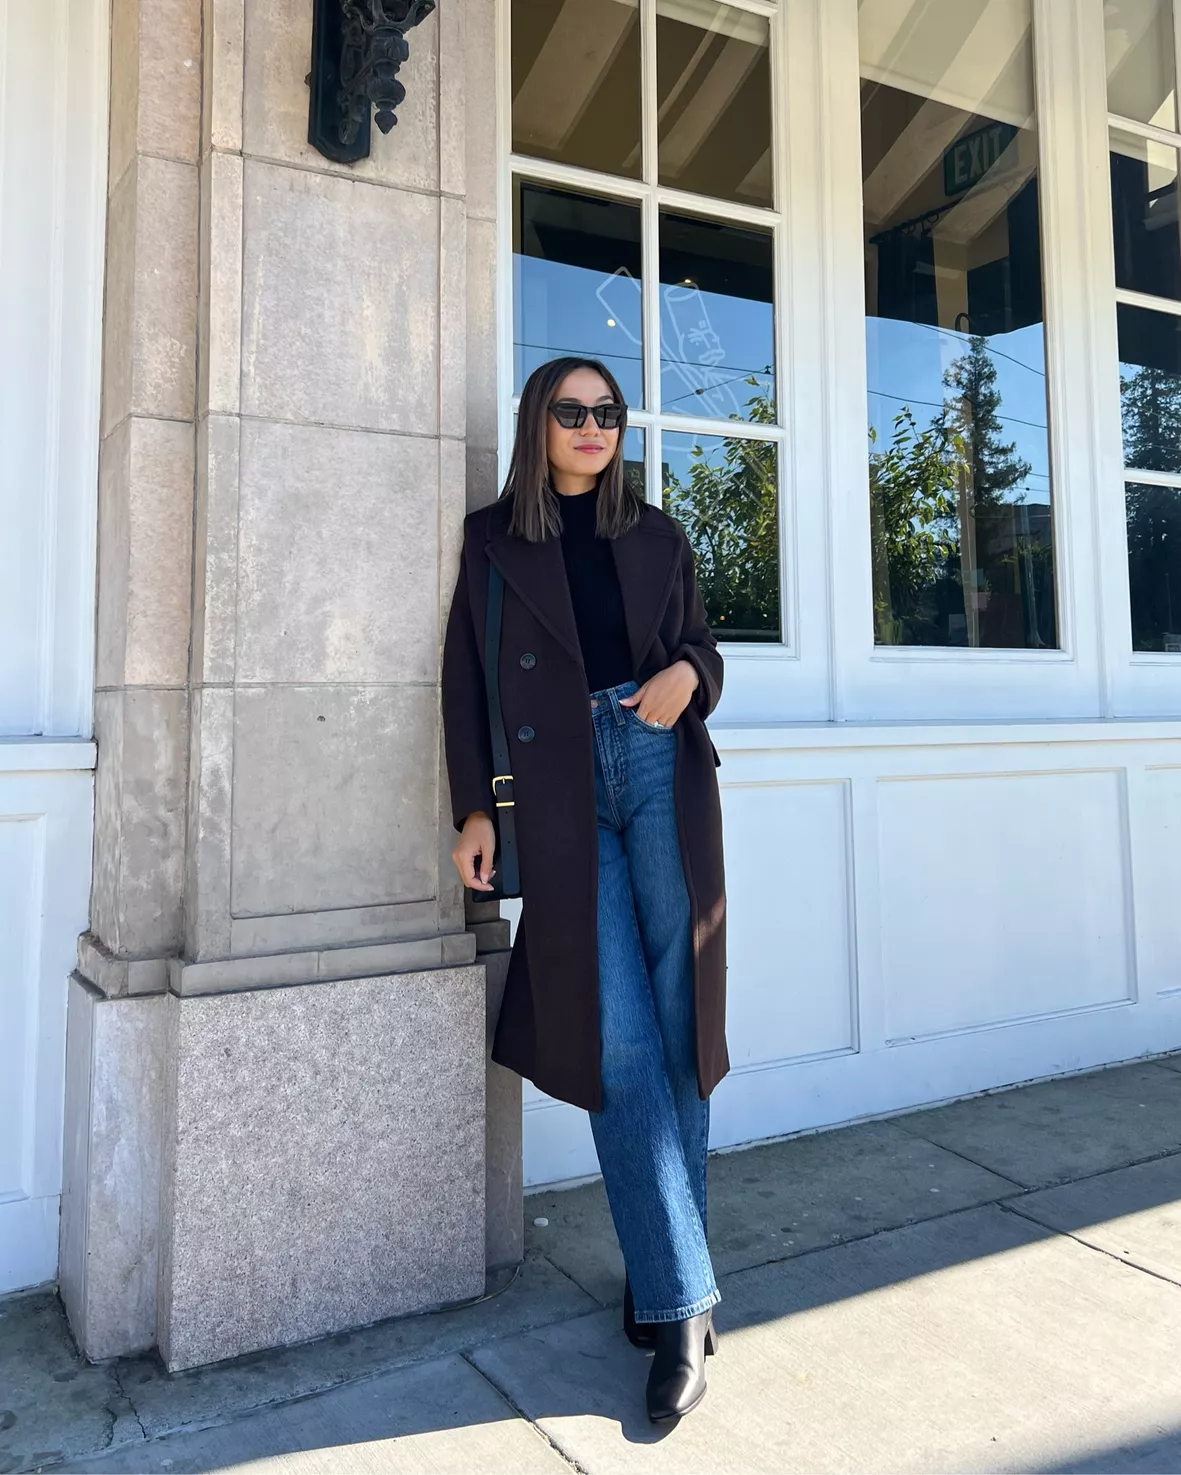 MY FALL OUTFIT INSPO, Gallery posted by Gianna